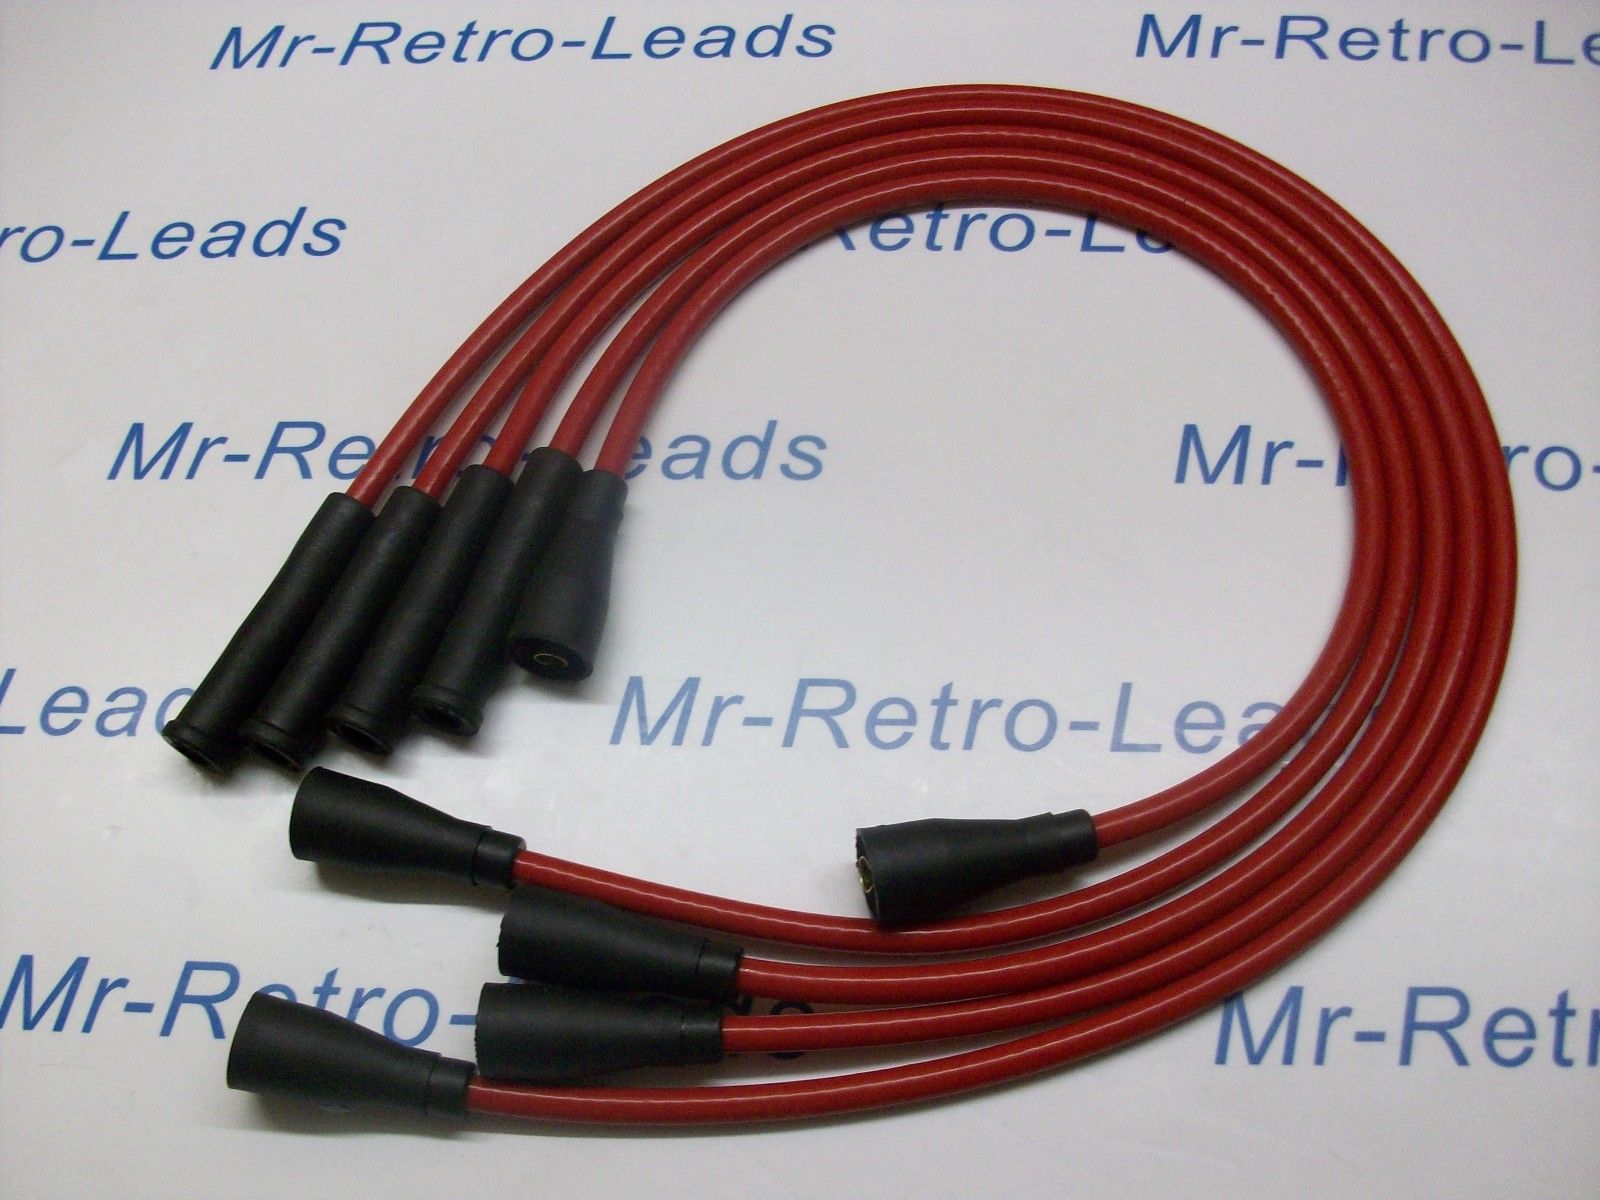 Red 8.5mm Performance Ignition Leads Fit. Ford Capri 1.6 2.0 Ohc Cortina P100 Ht